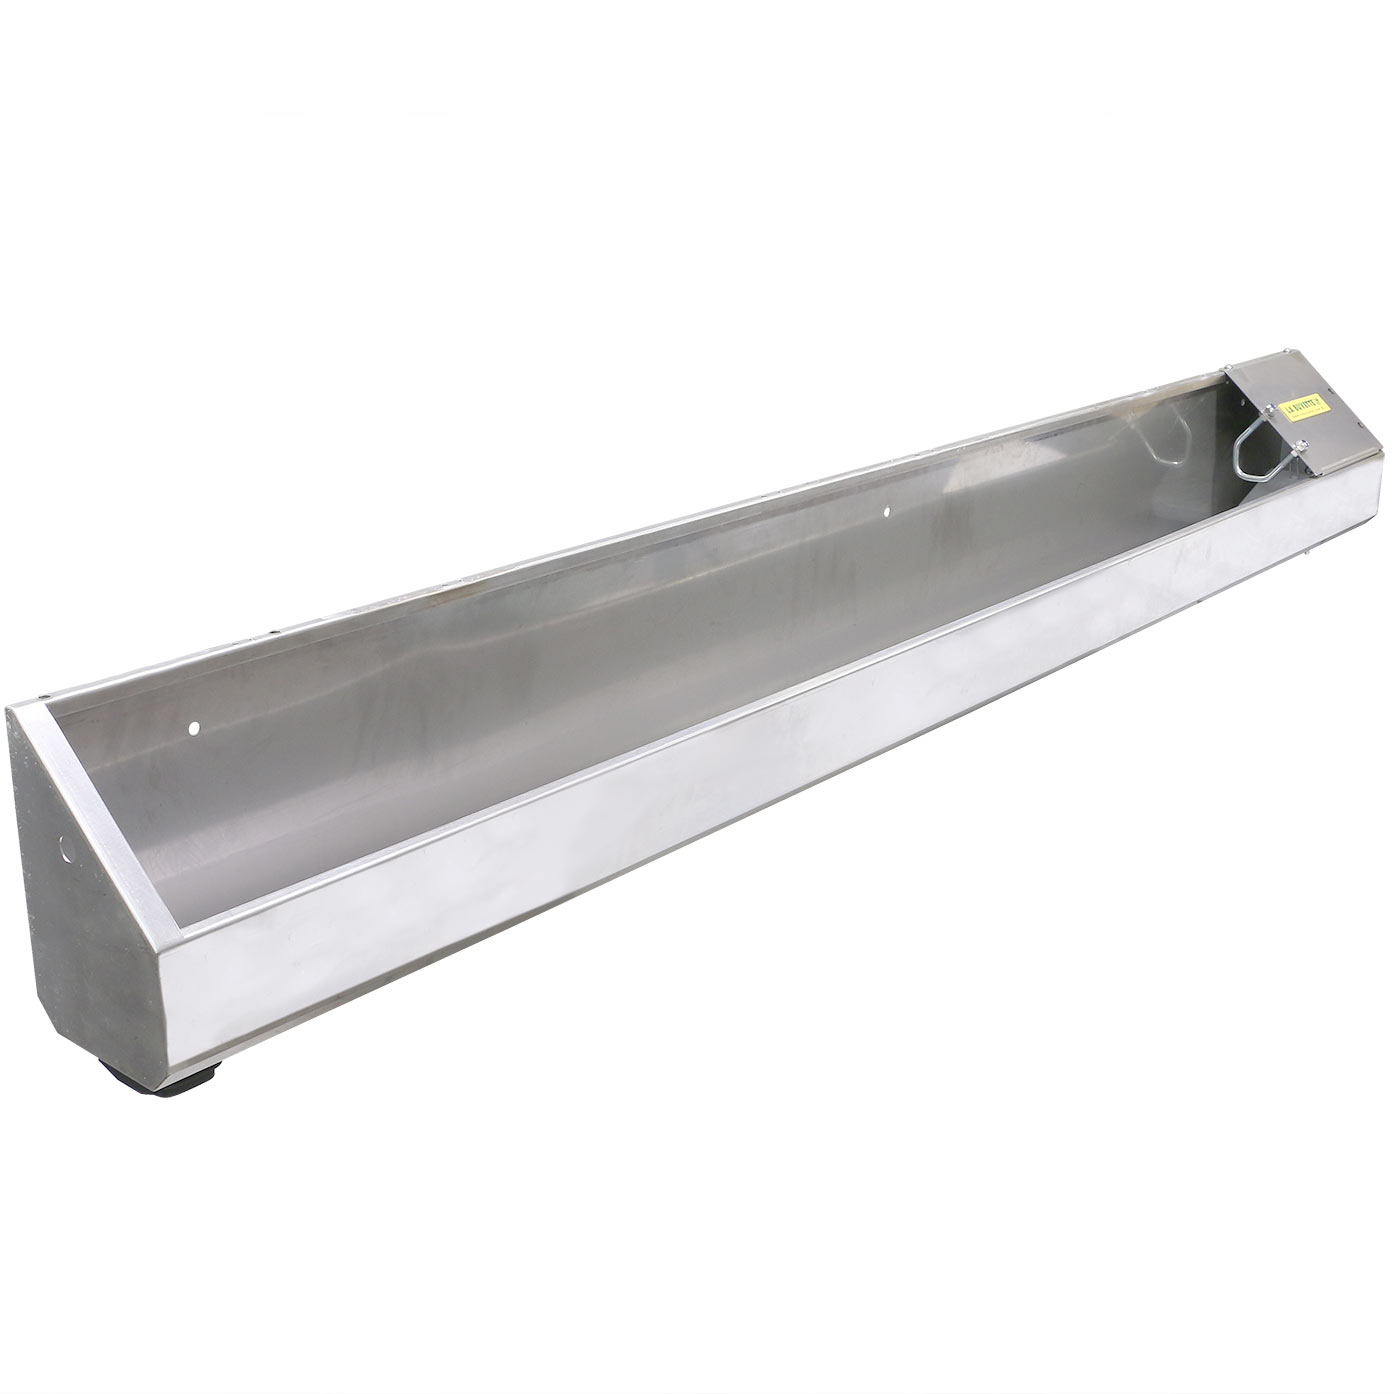 OVICAP INOX 240 Stainless steel DRINKING TROUGH